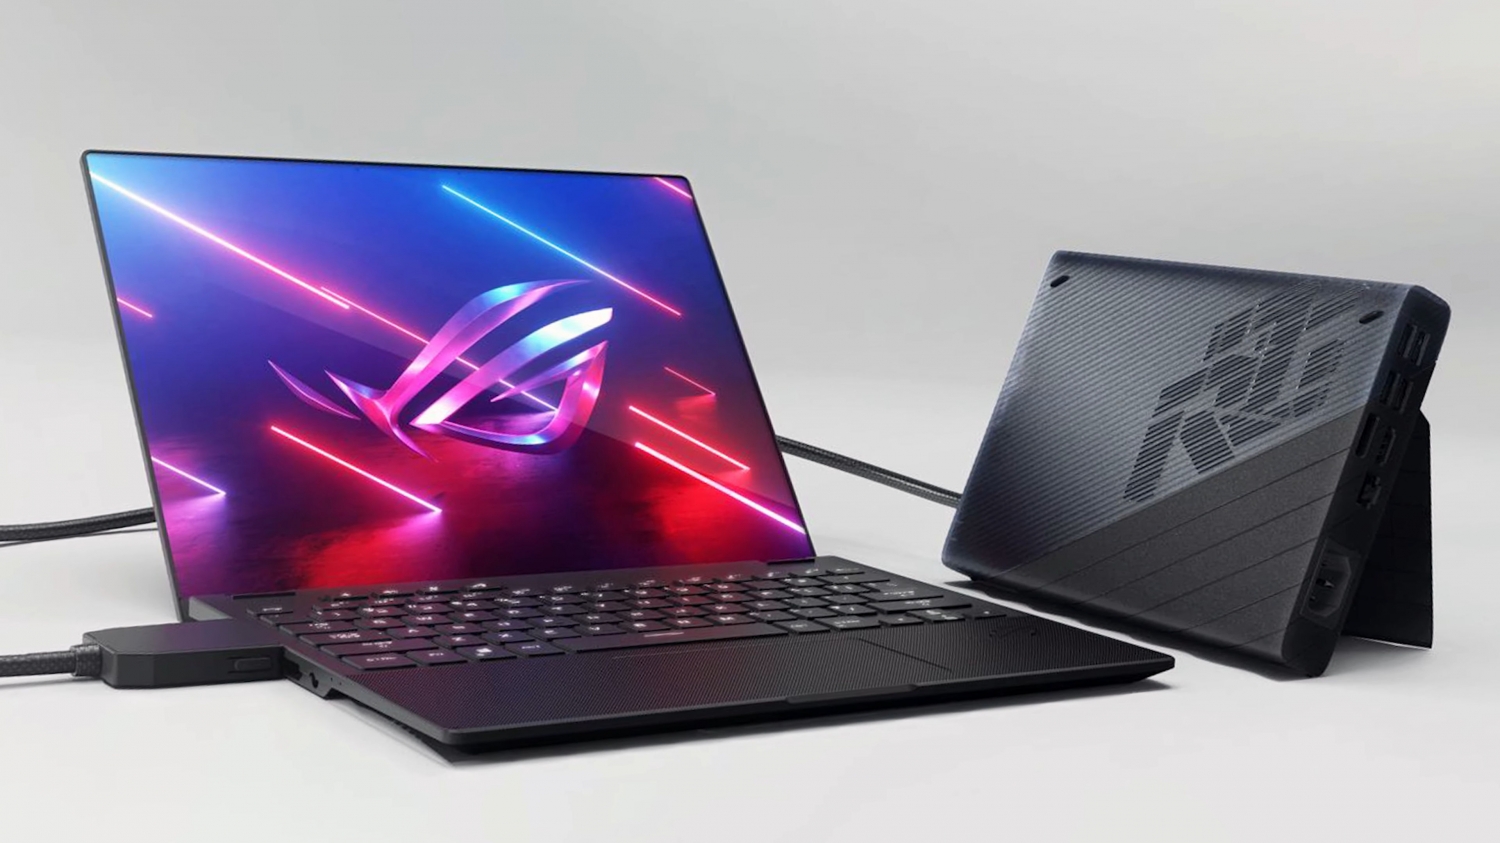 ASUS ROG Flow X13: ultra-portable notebook with external RTX 3080 GPU